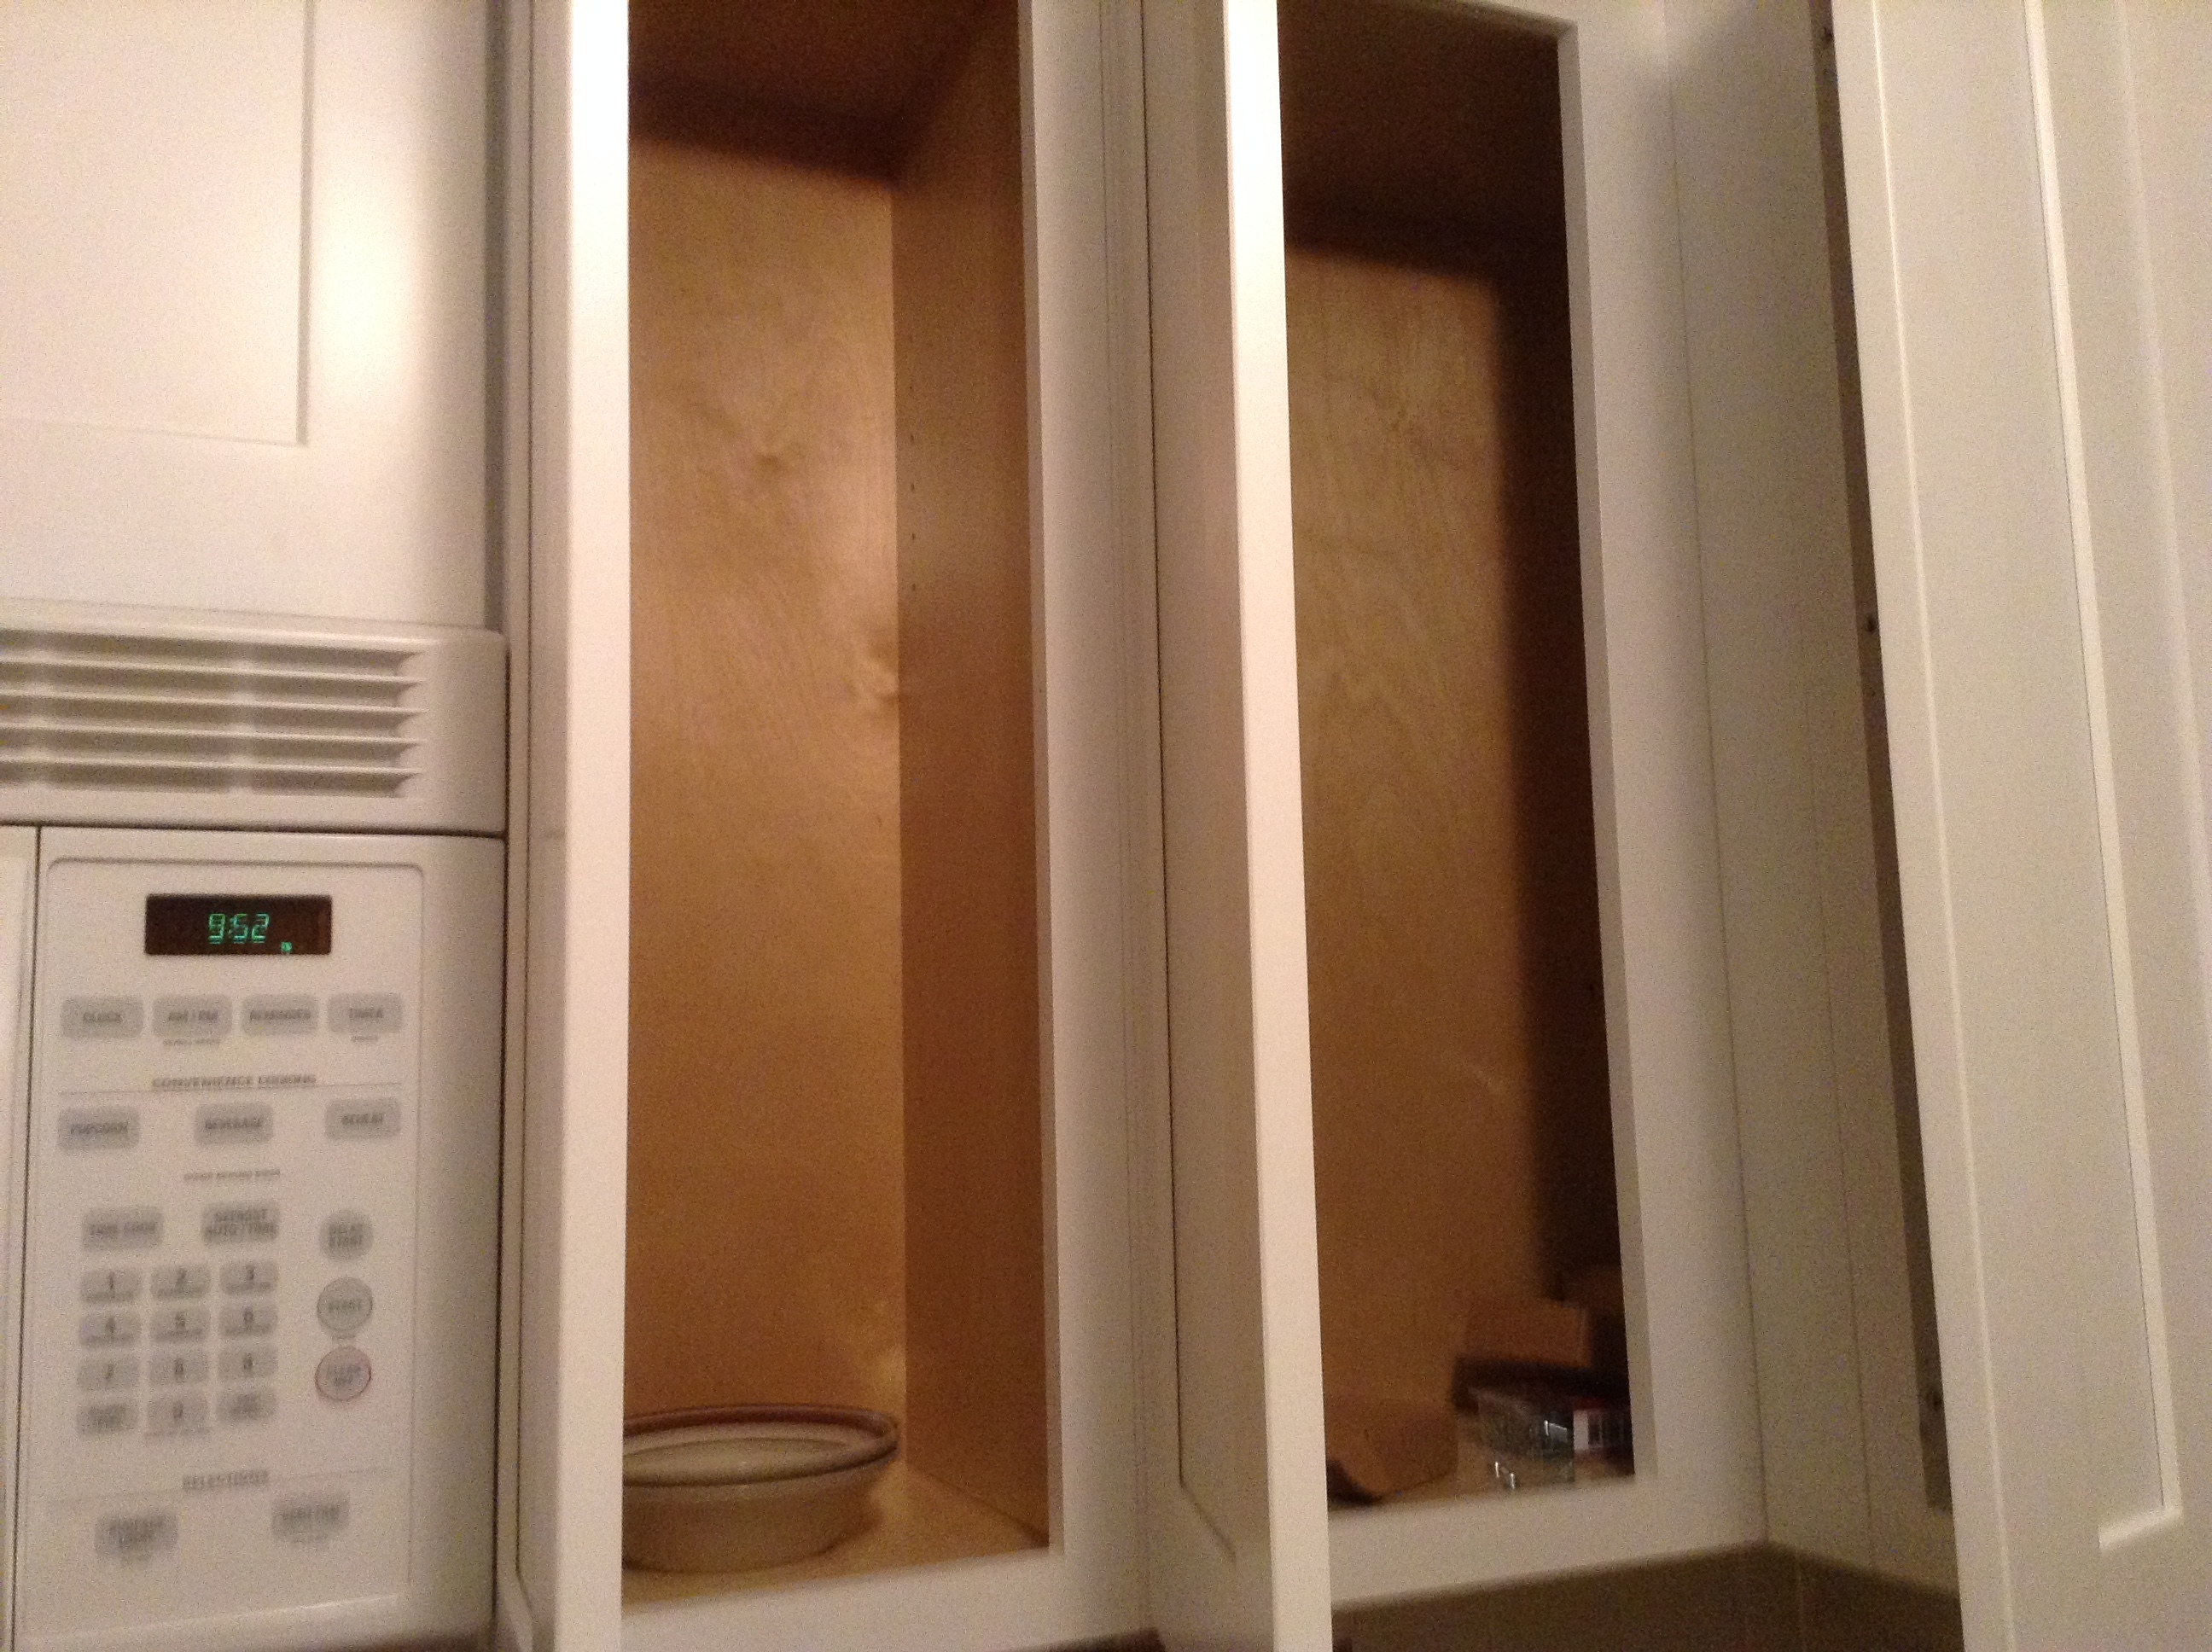 Cabinets are narrower than a size of dinner plate 